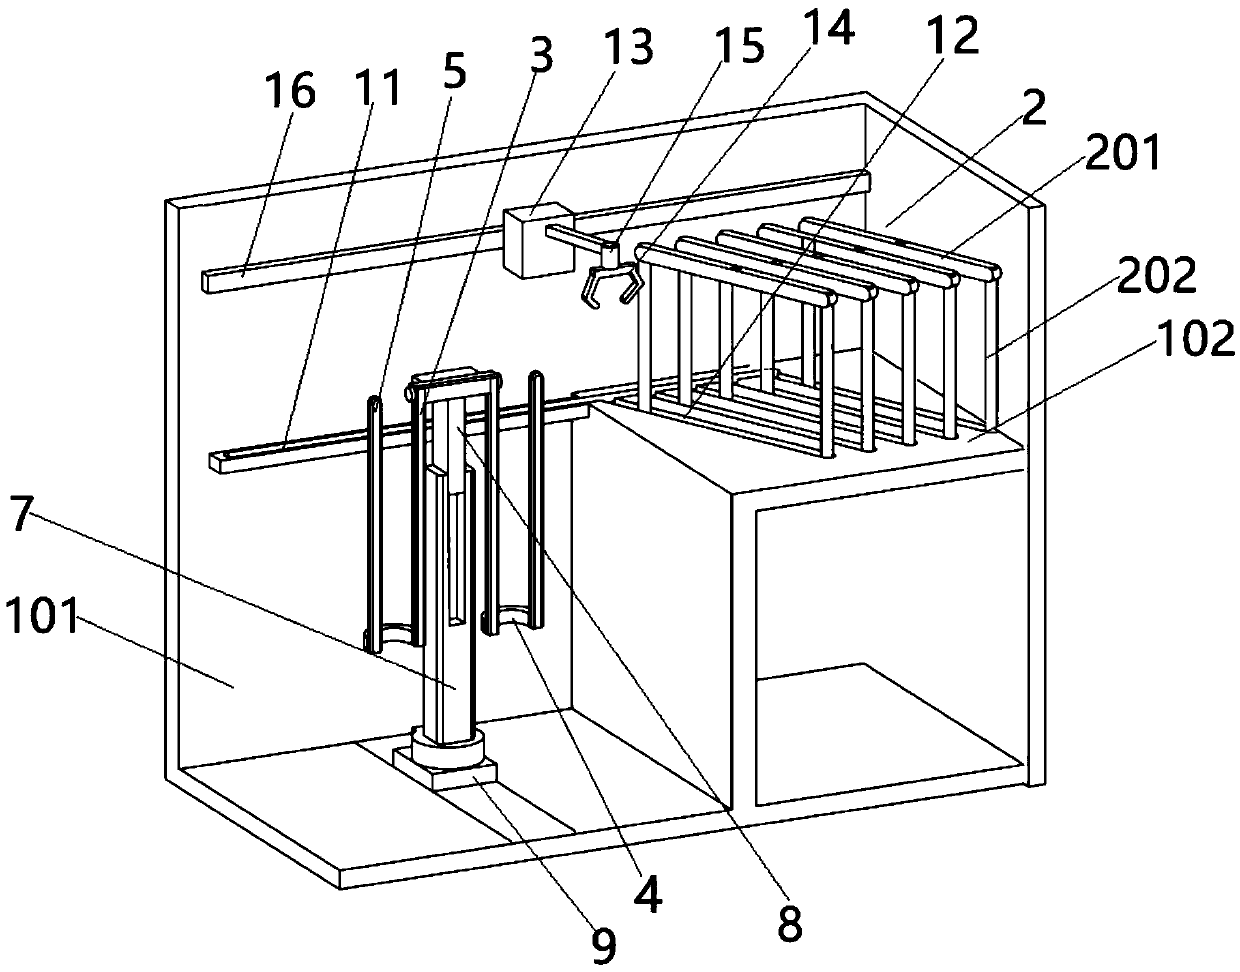 Control method of automatic dressing cabinet